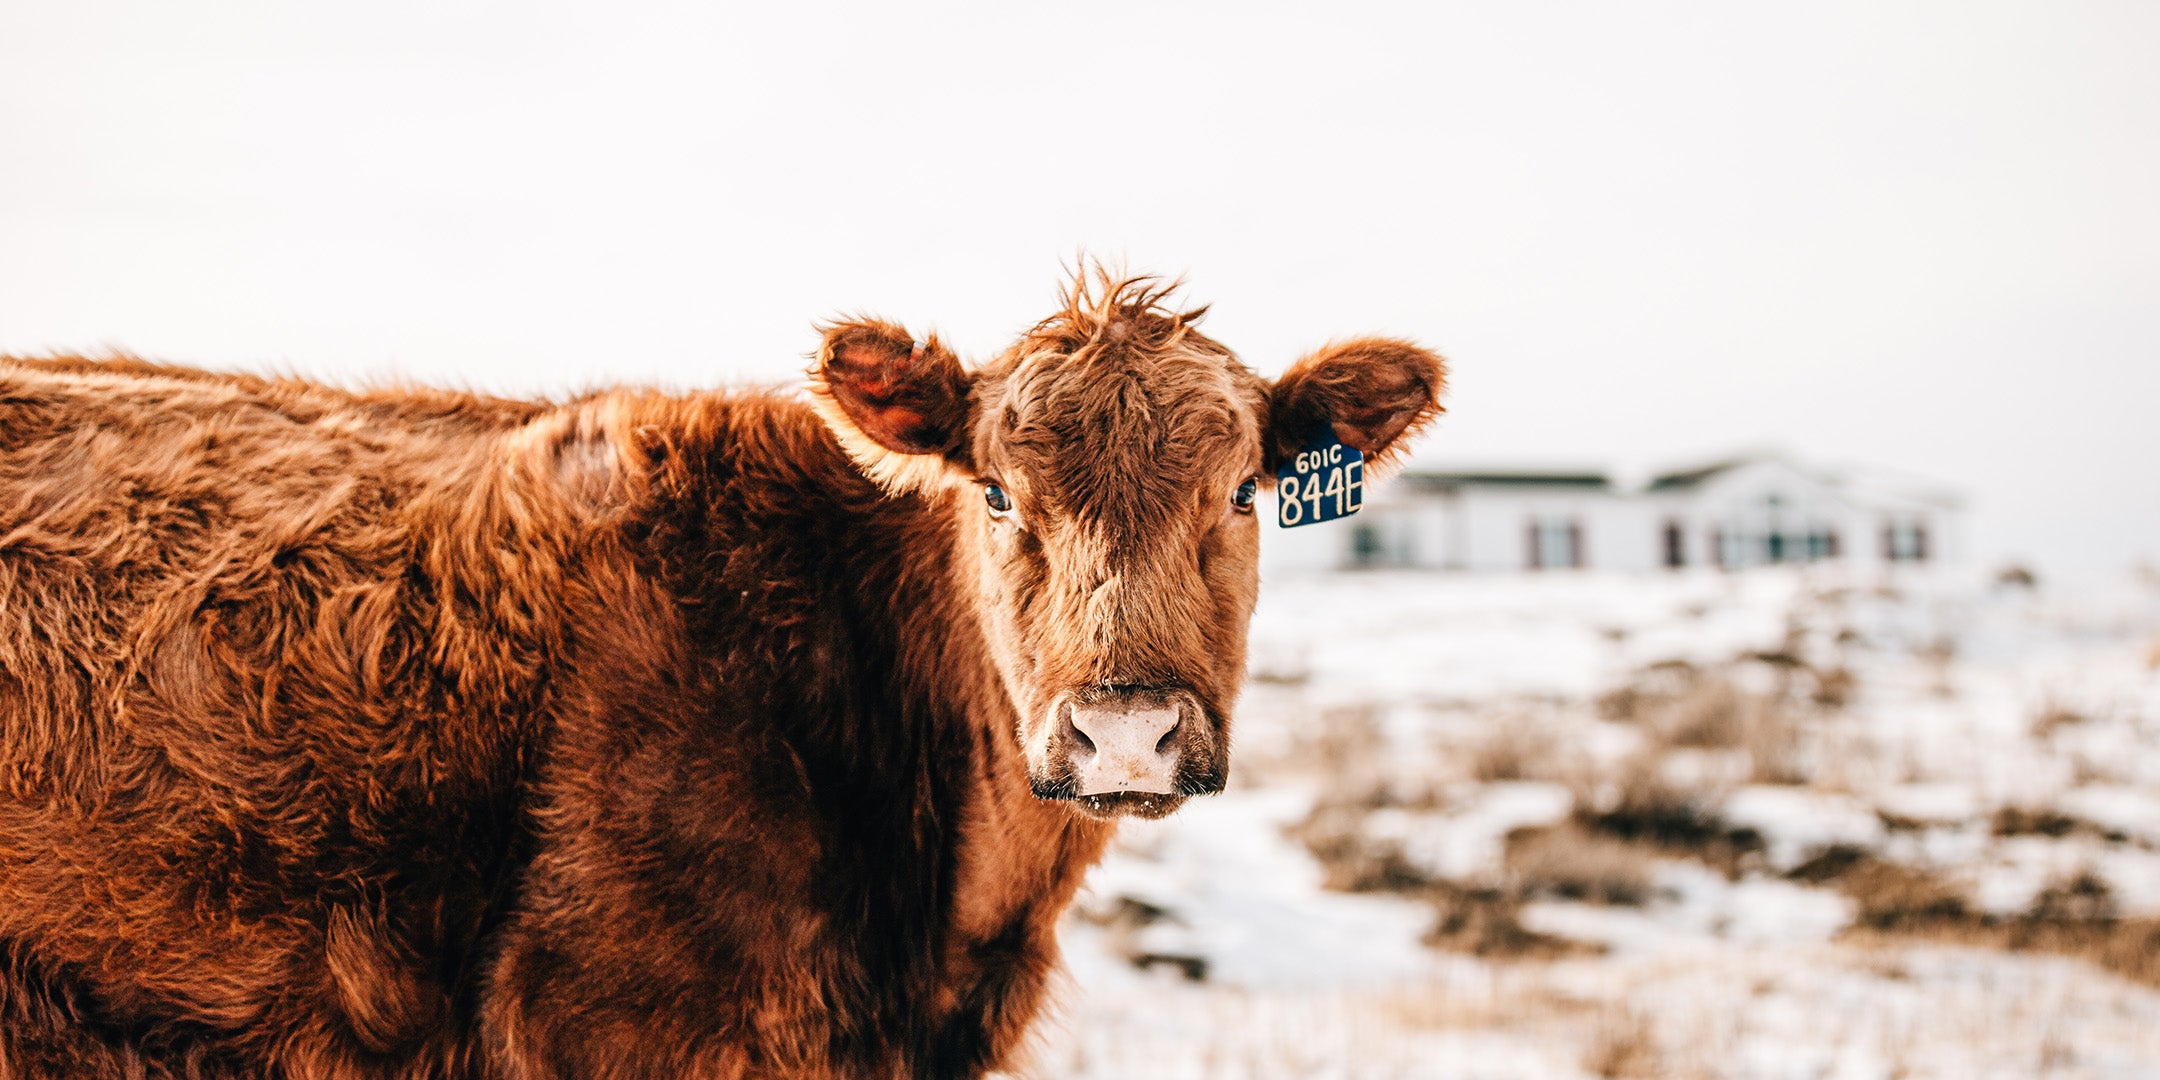 Red Angus cow with ear tag standing in snow